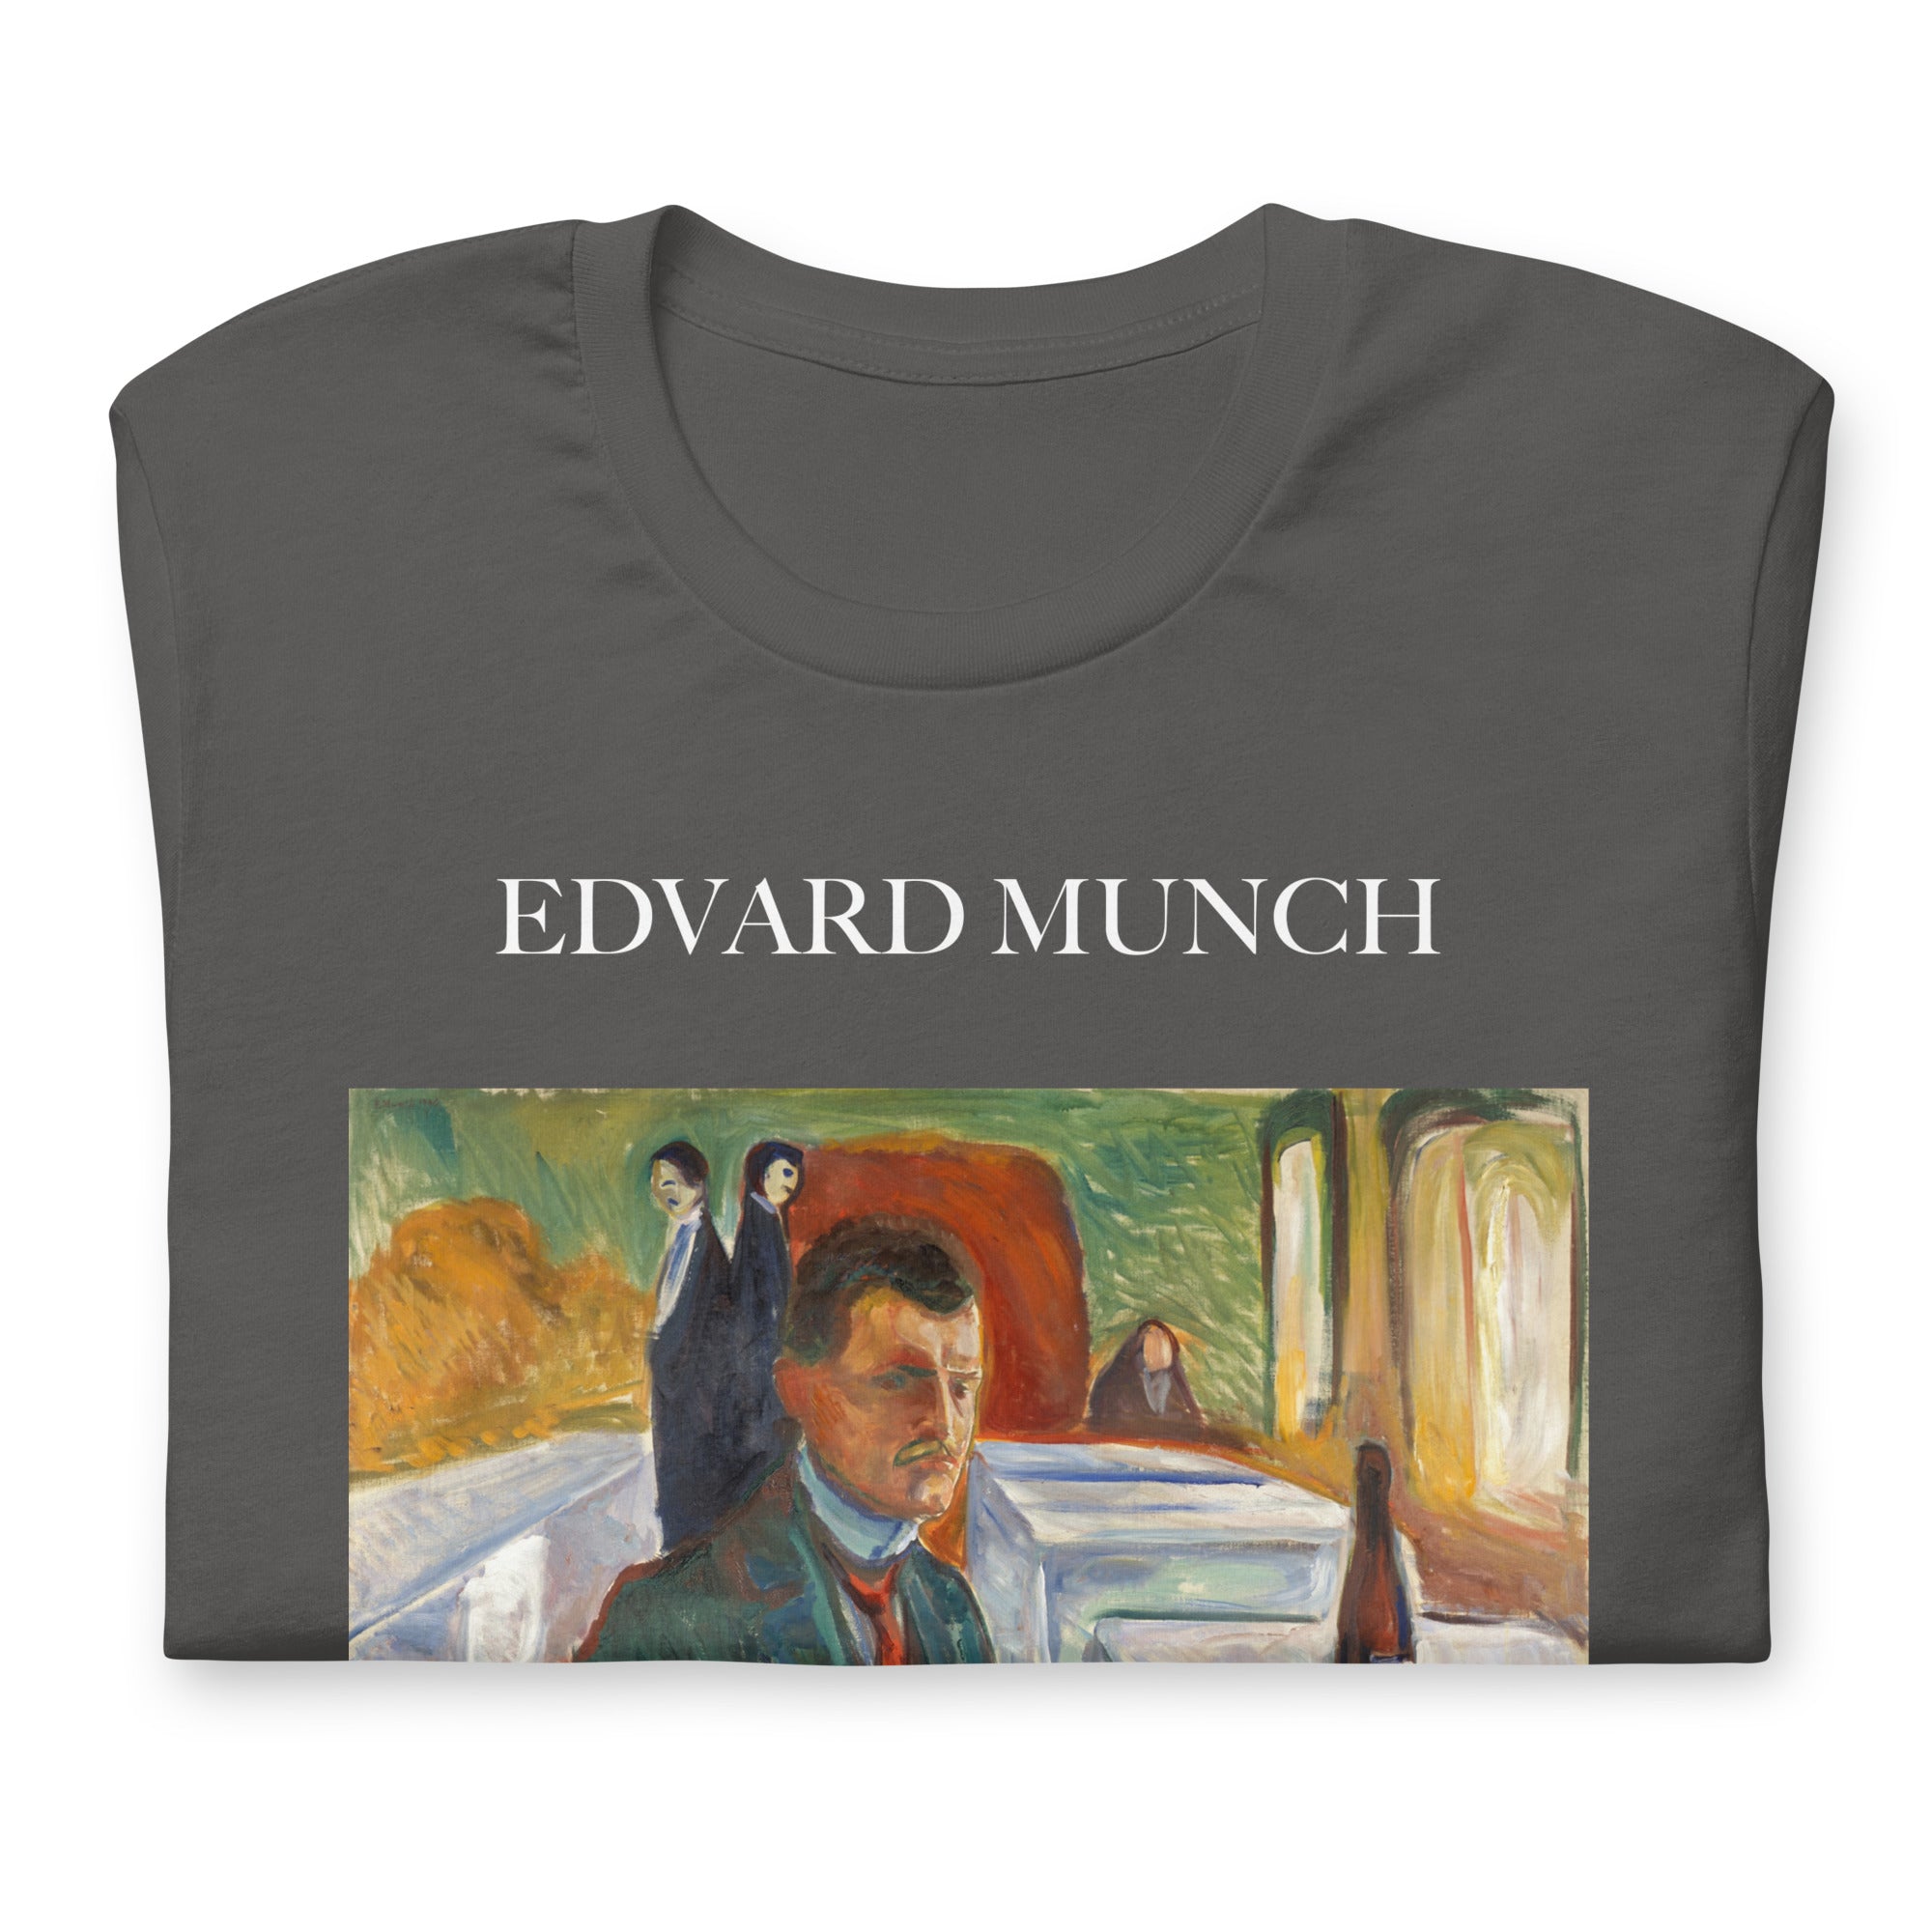 Edvard Munch 'Self-Portrait with a Bottle of Wine' Famous Painting T-Shirt | Unisex Classic Art Tee